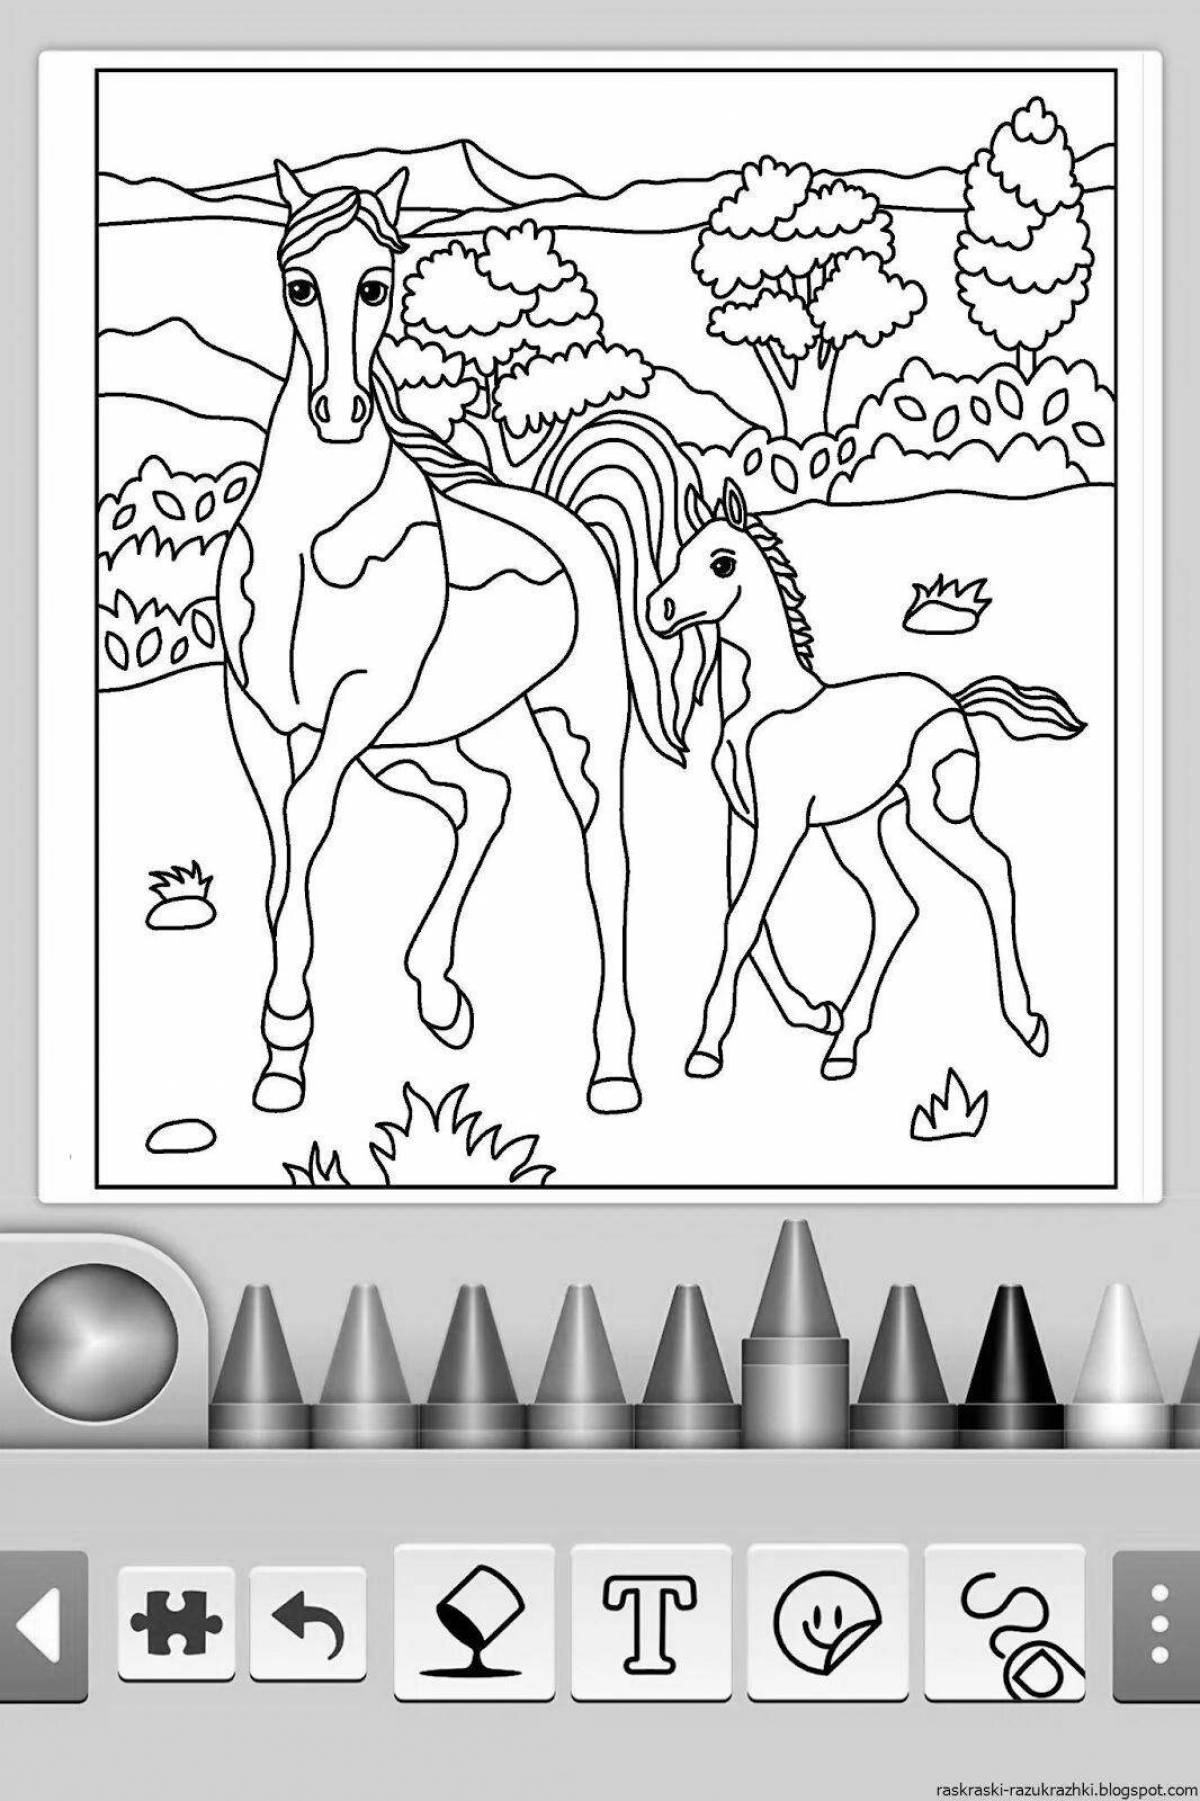 Fun coloring pages for girls 5 years old